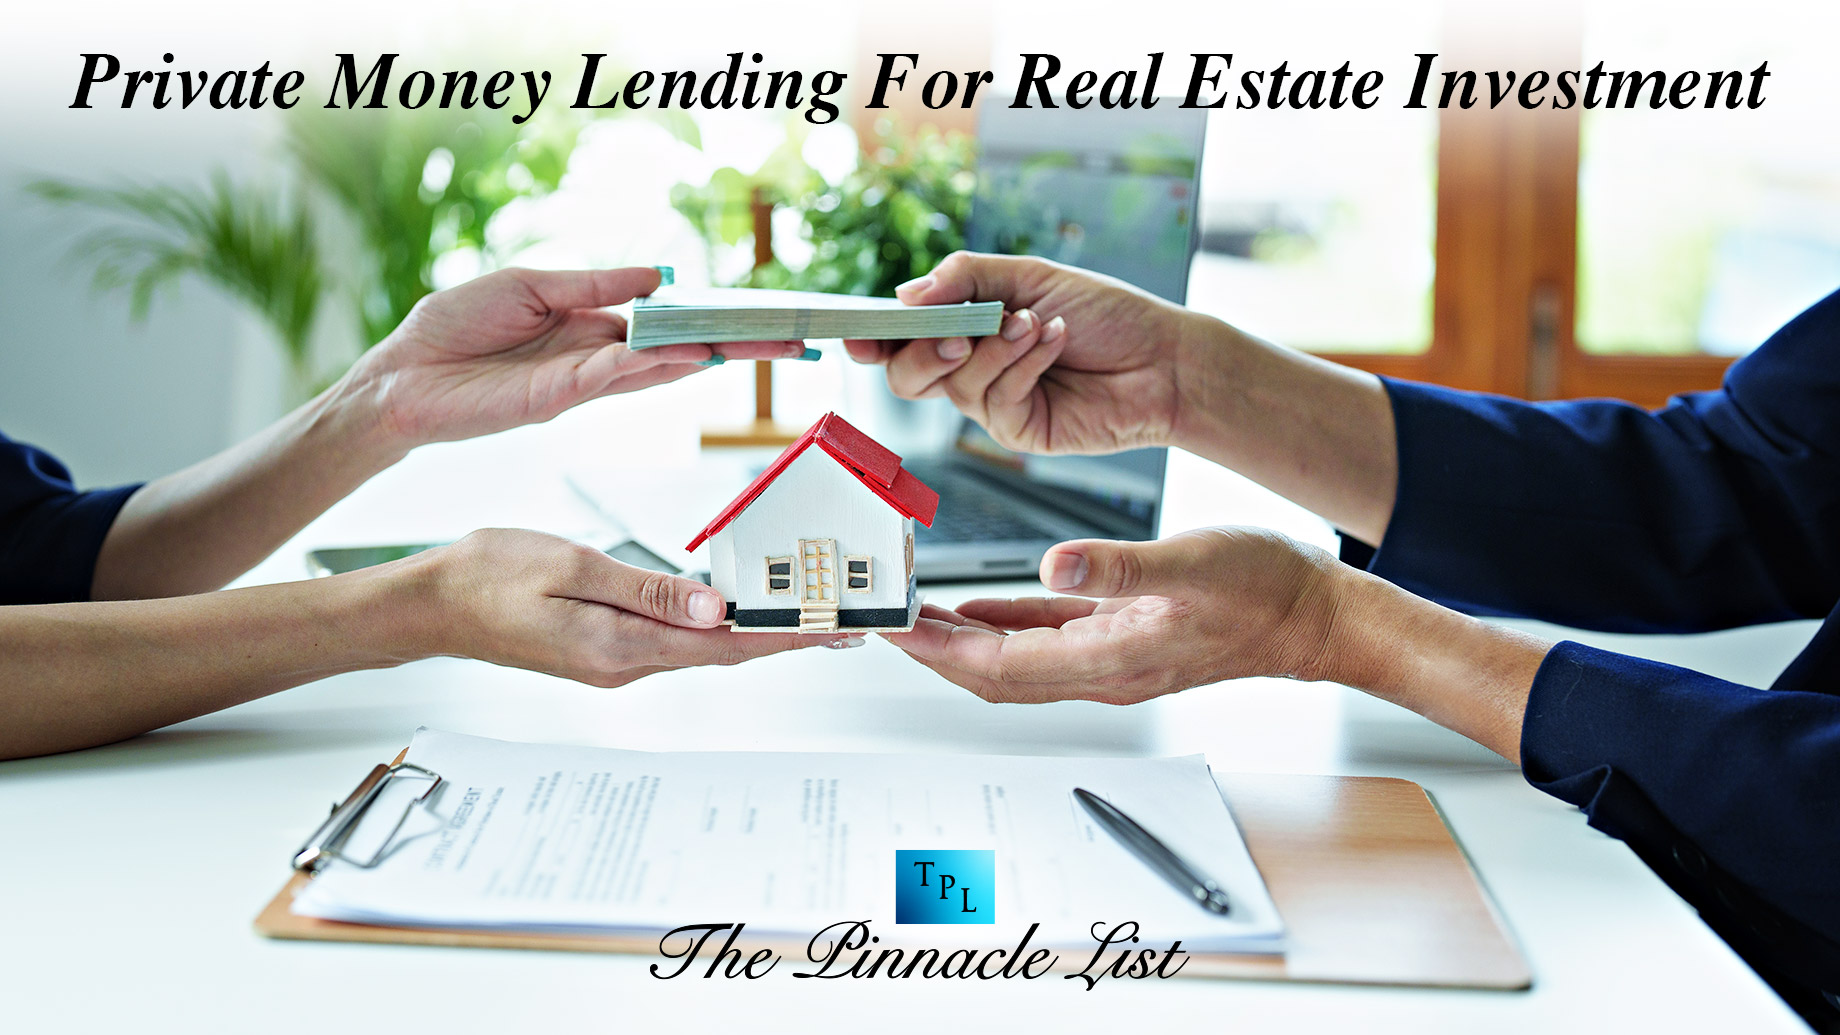 Private Money Lending For Real Estate Investment